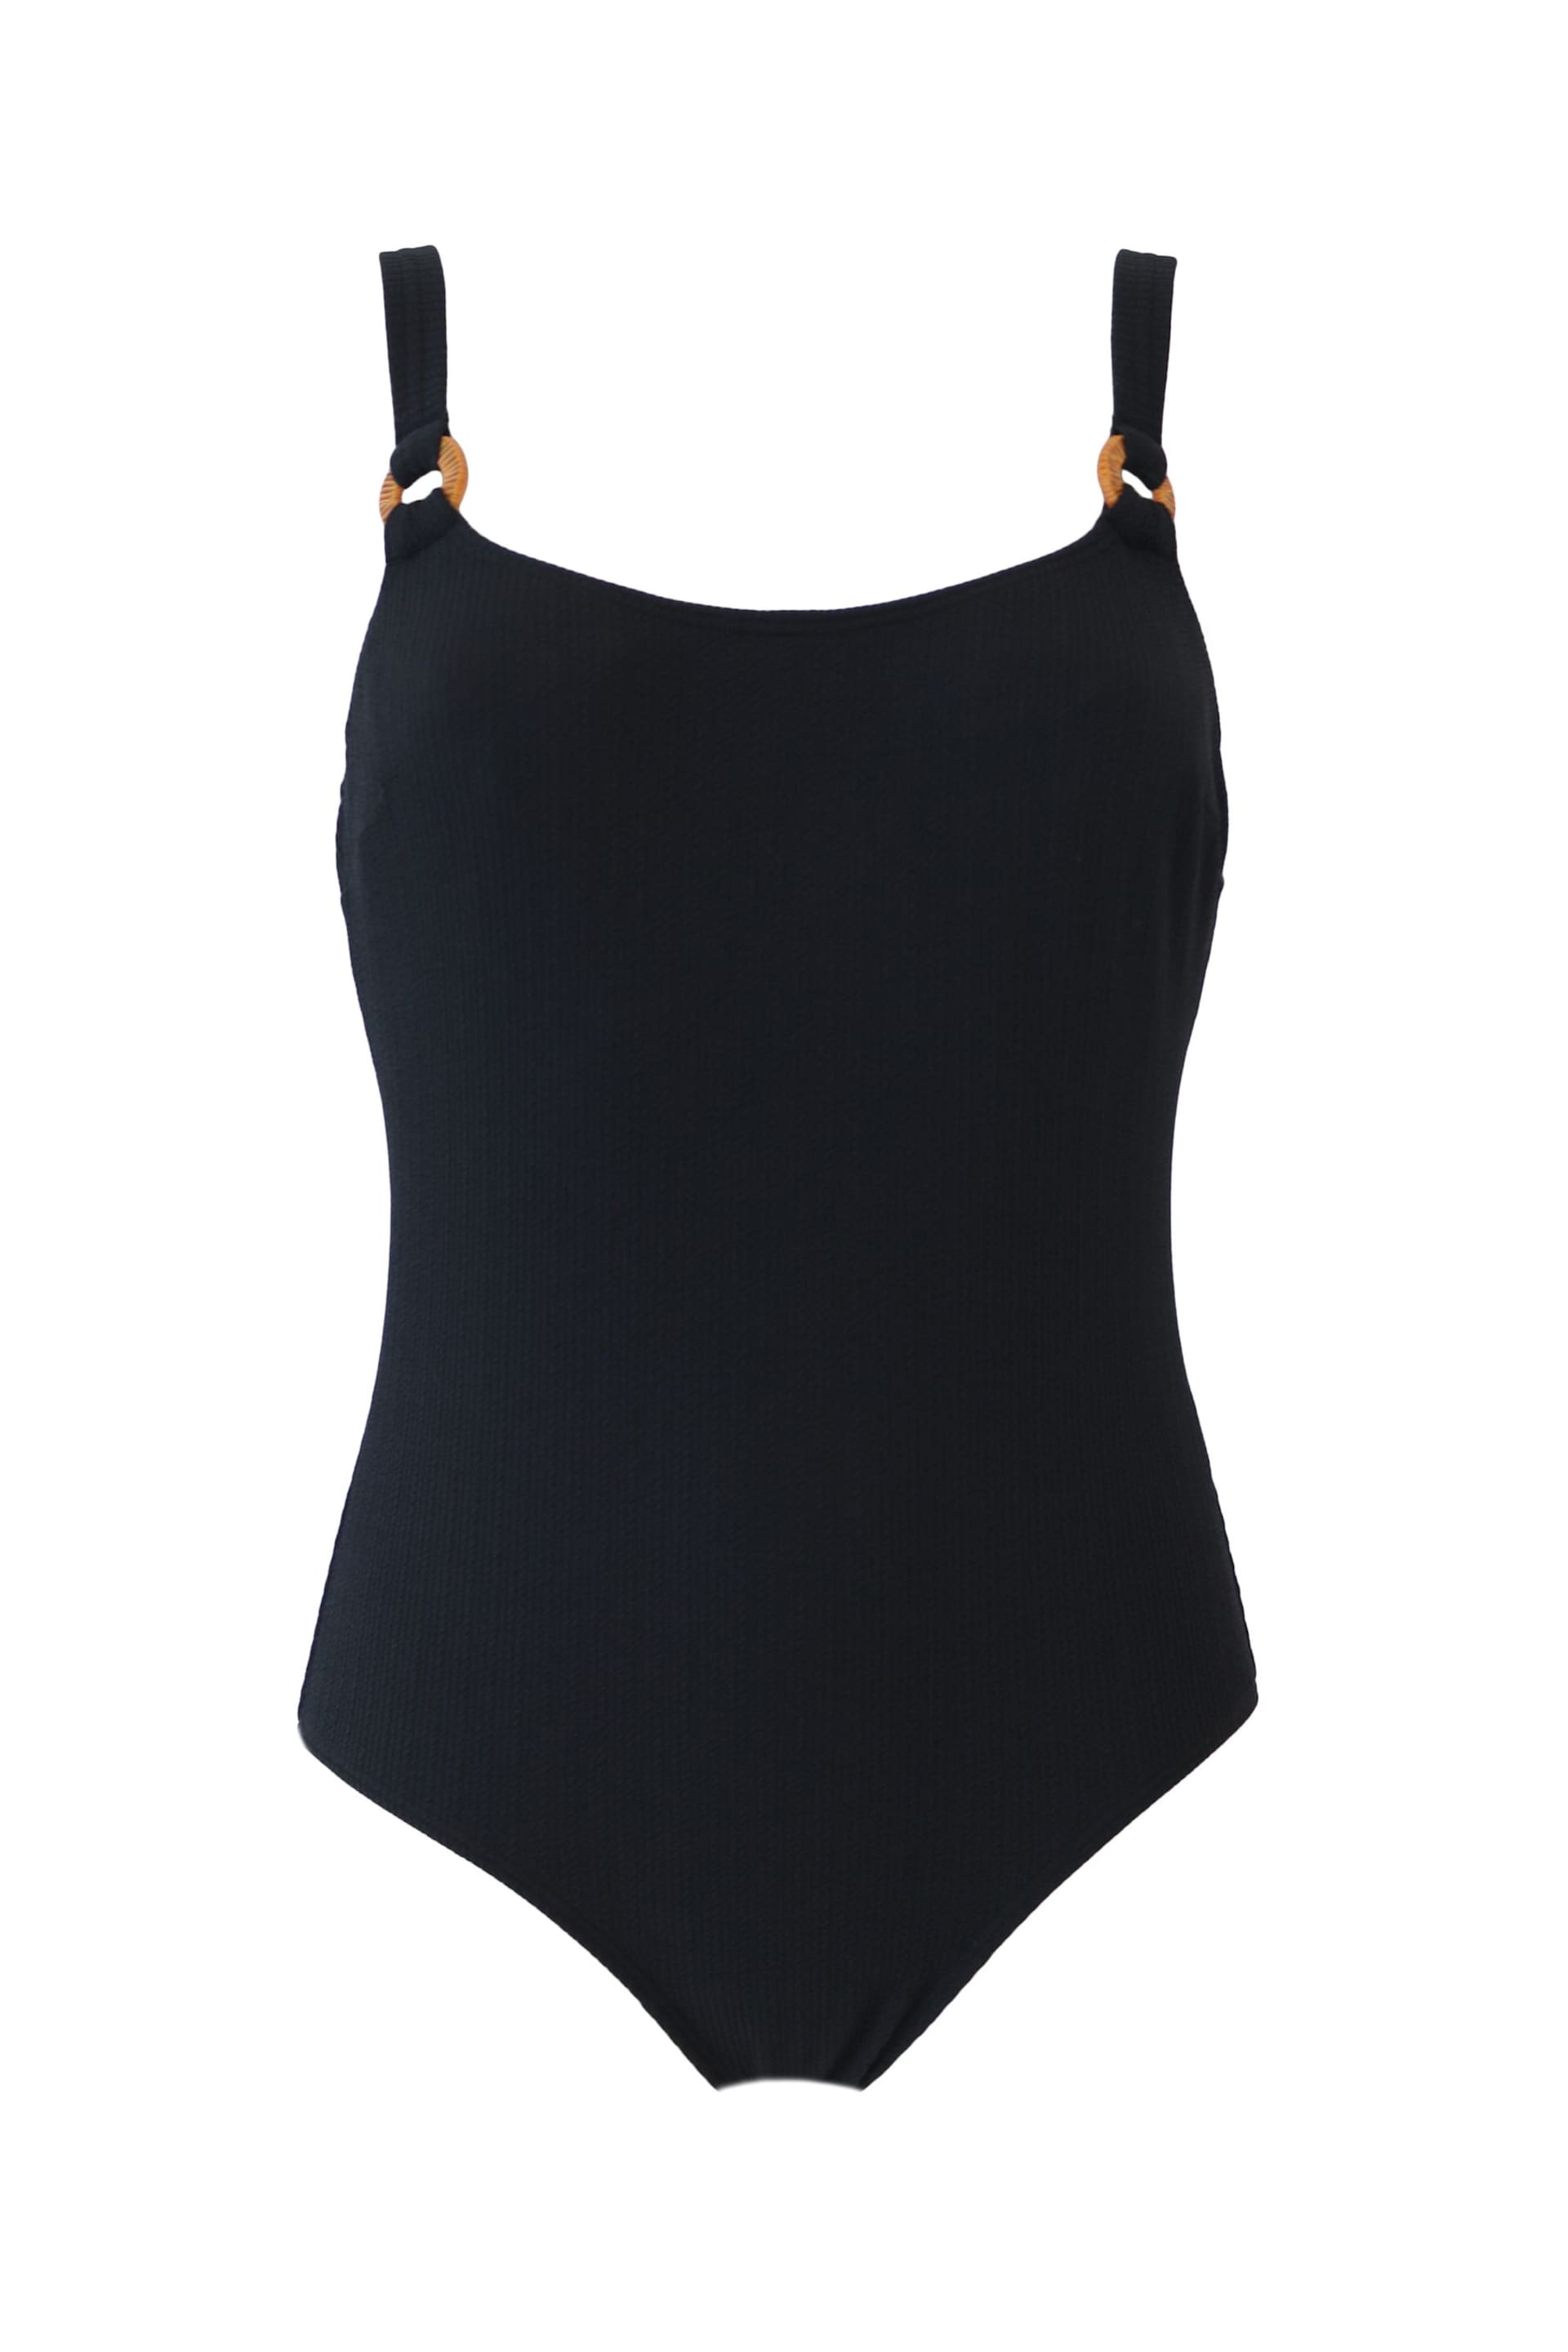 Pour Moi Black Cali Recycled Ring Underwired Control Swimsuit - Image 4 of 5